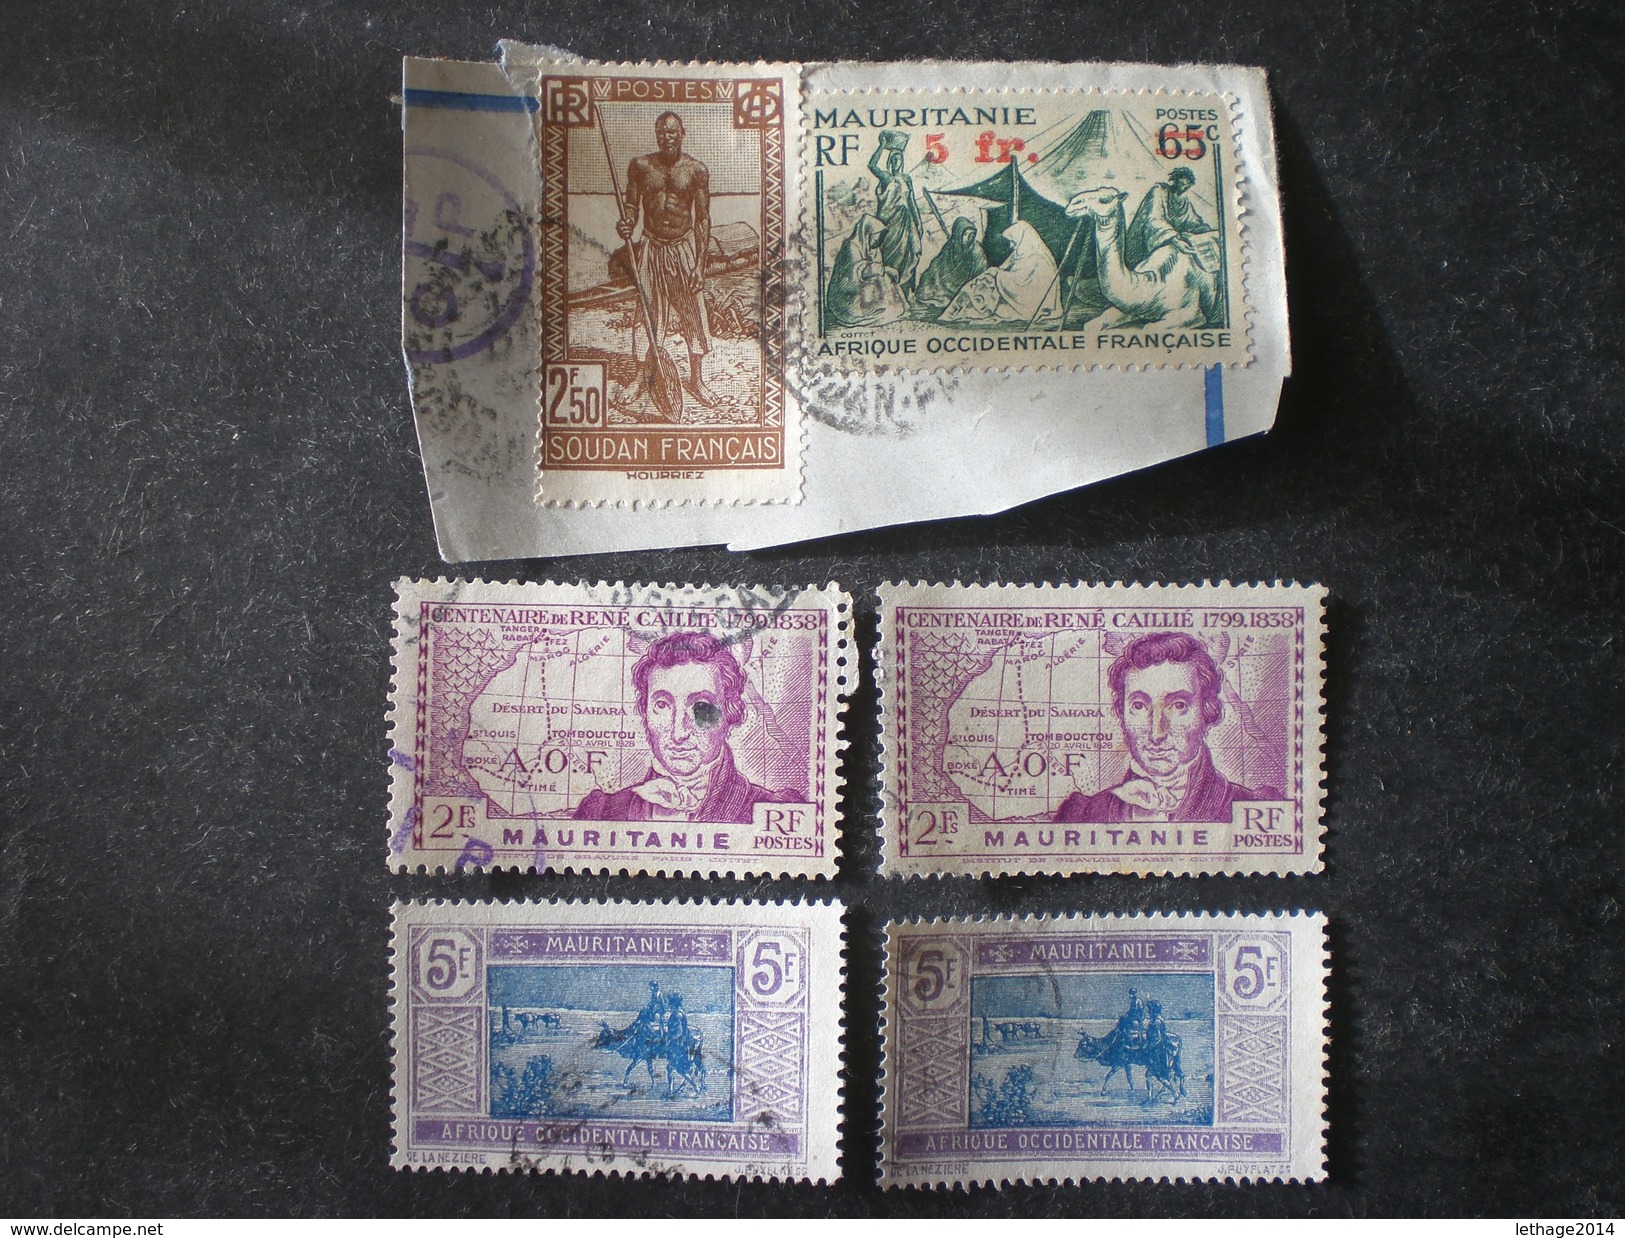 AOF MAURITANIA MAURITANIE موريتانيا Mauritanië 1944 Issues Of 1938 And 1939 Surcharged  + 1906 CAMEL - Gebruikt